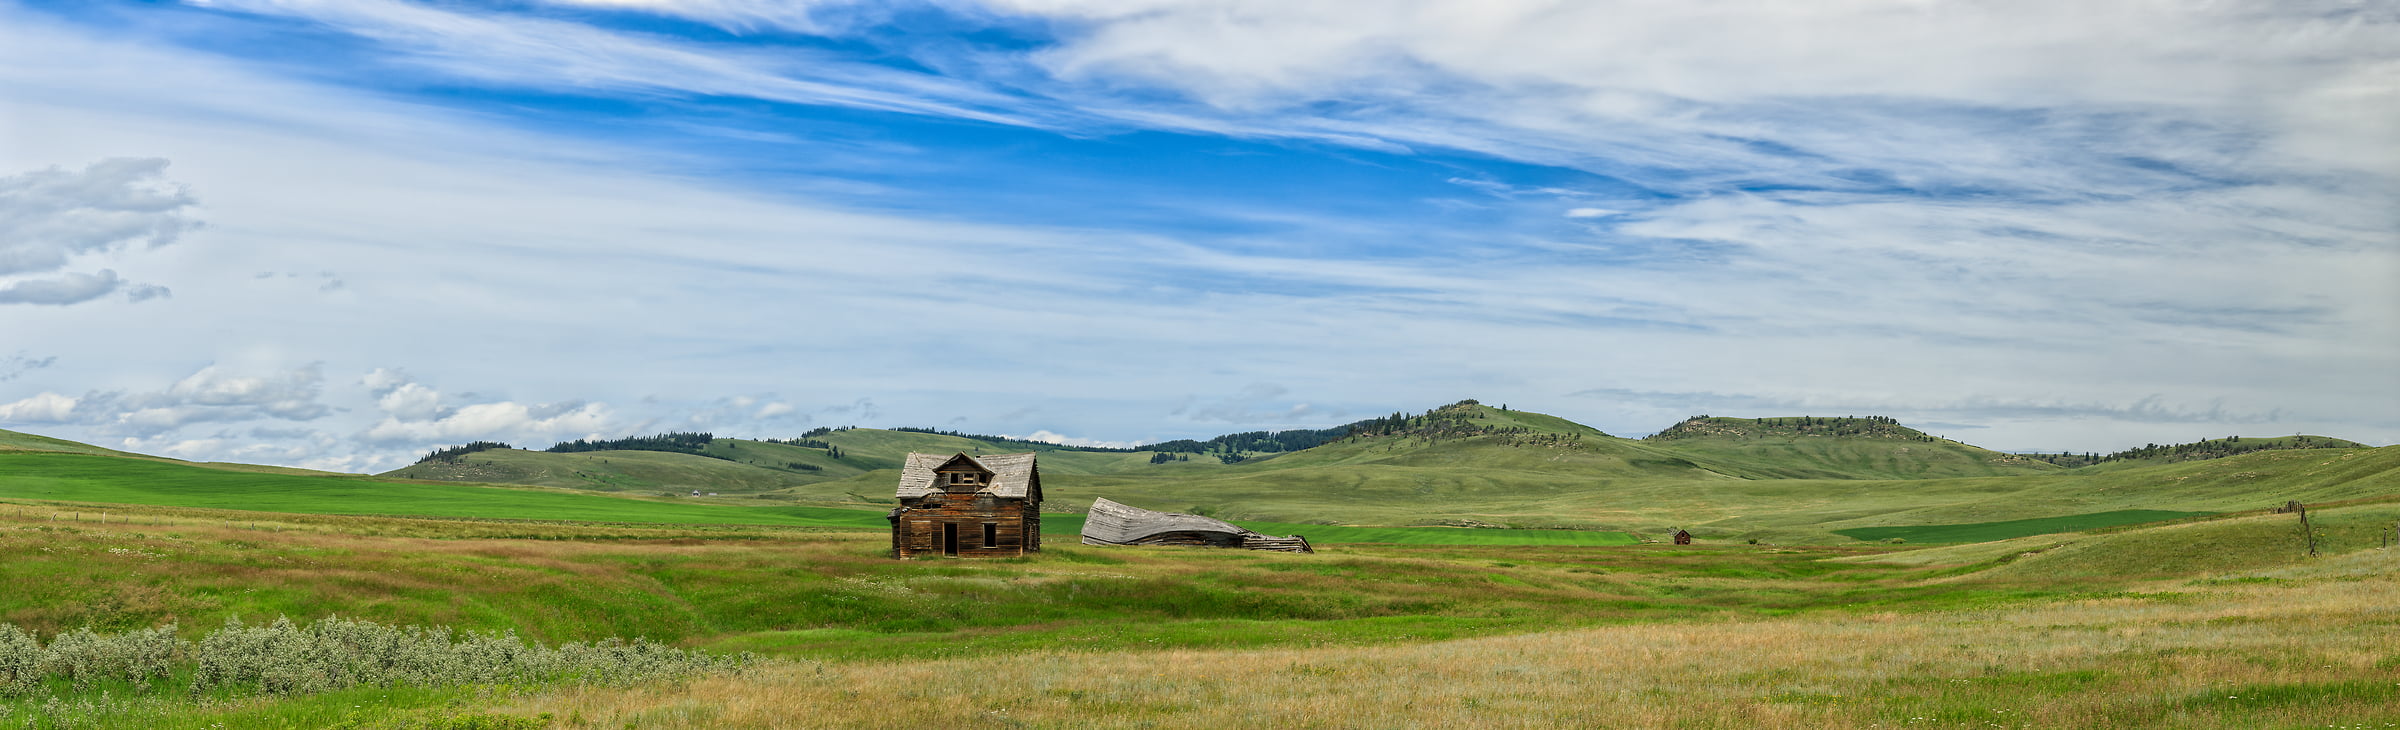 232 megapixels! A very high resolution, large-format VAST photo print of a house on a prairie; landscape photograph created by Scott Dimond in Pincher Creek No. 9, Alberta, Canada.